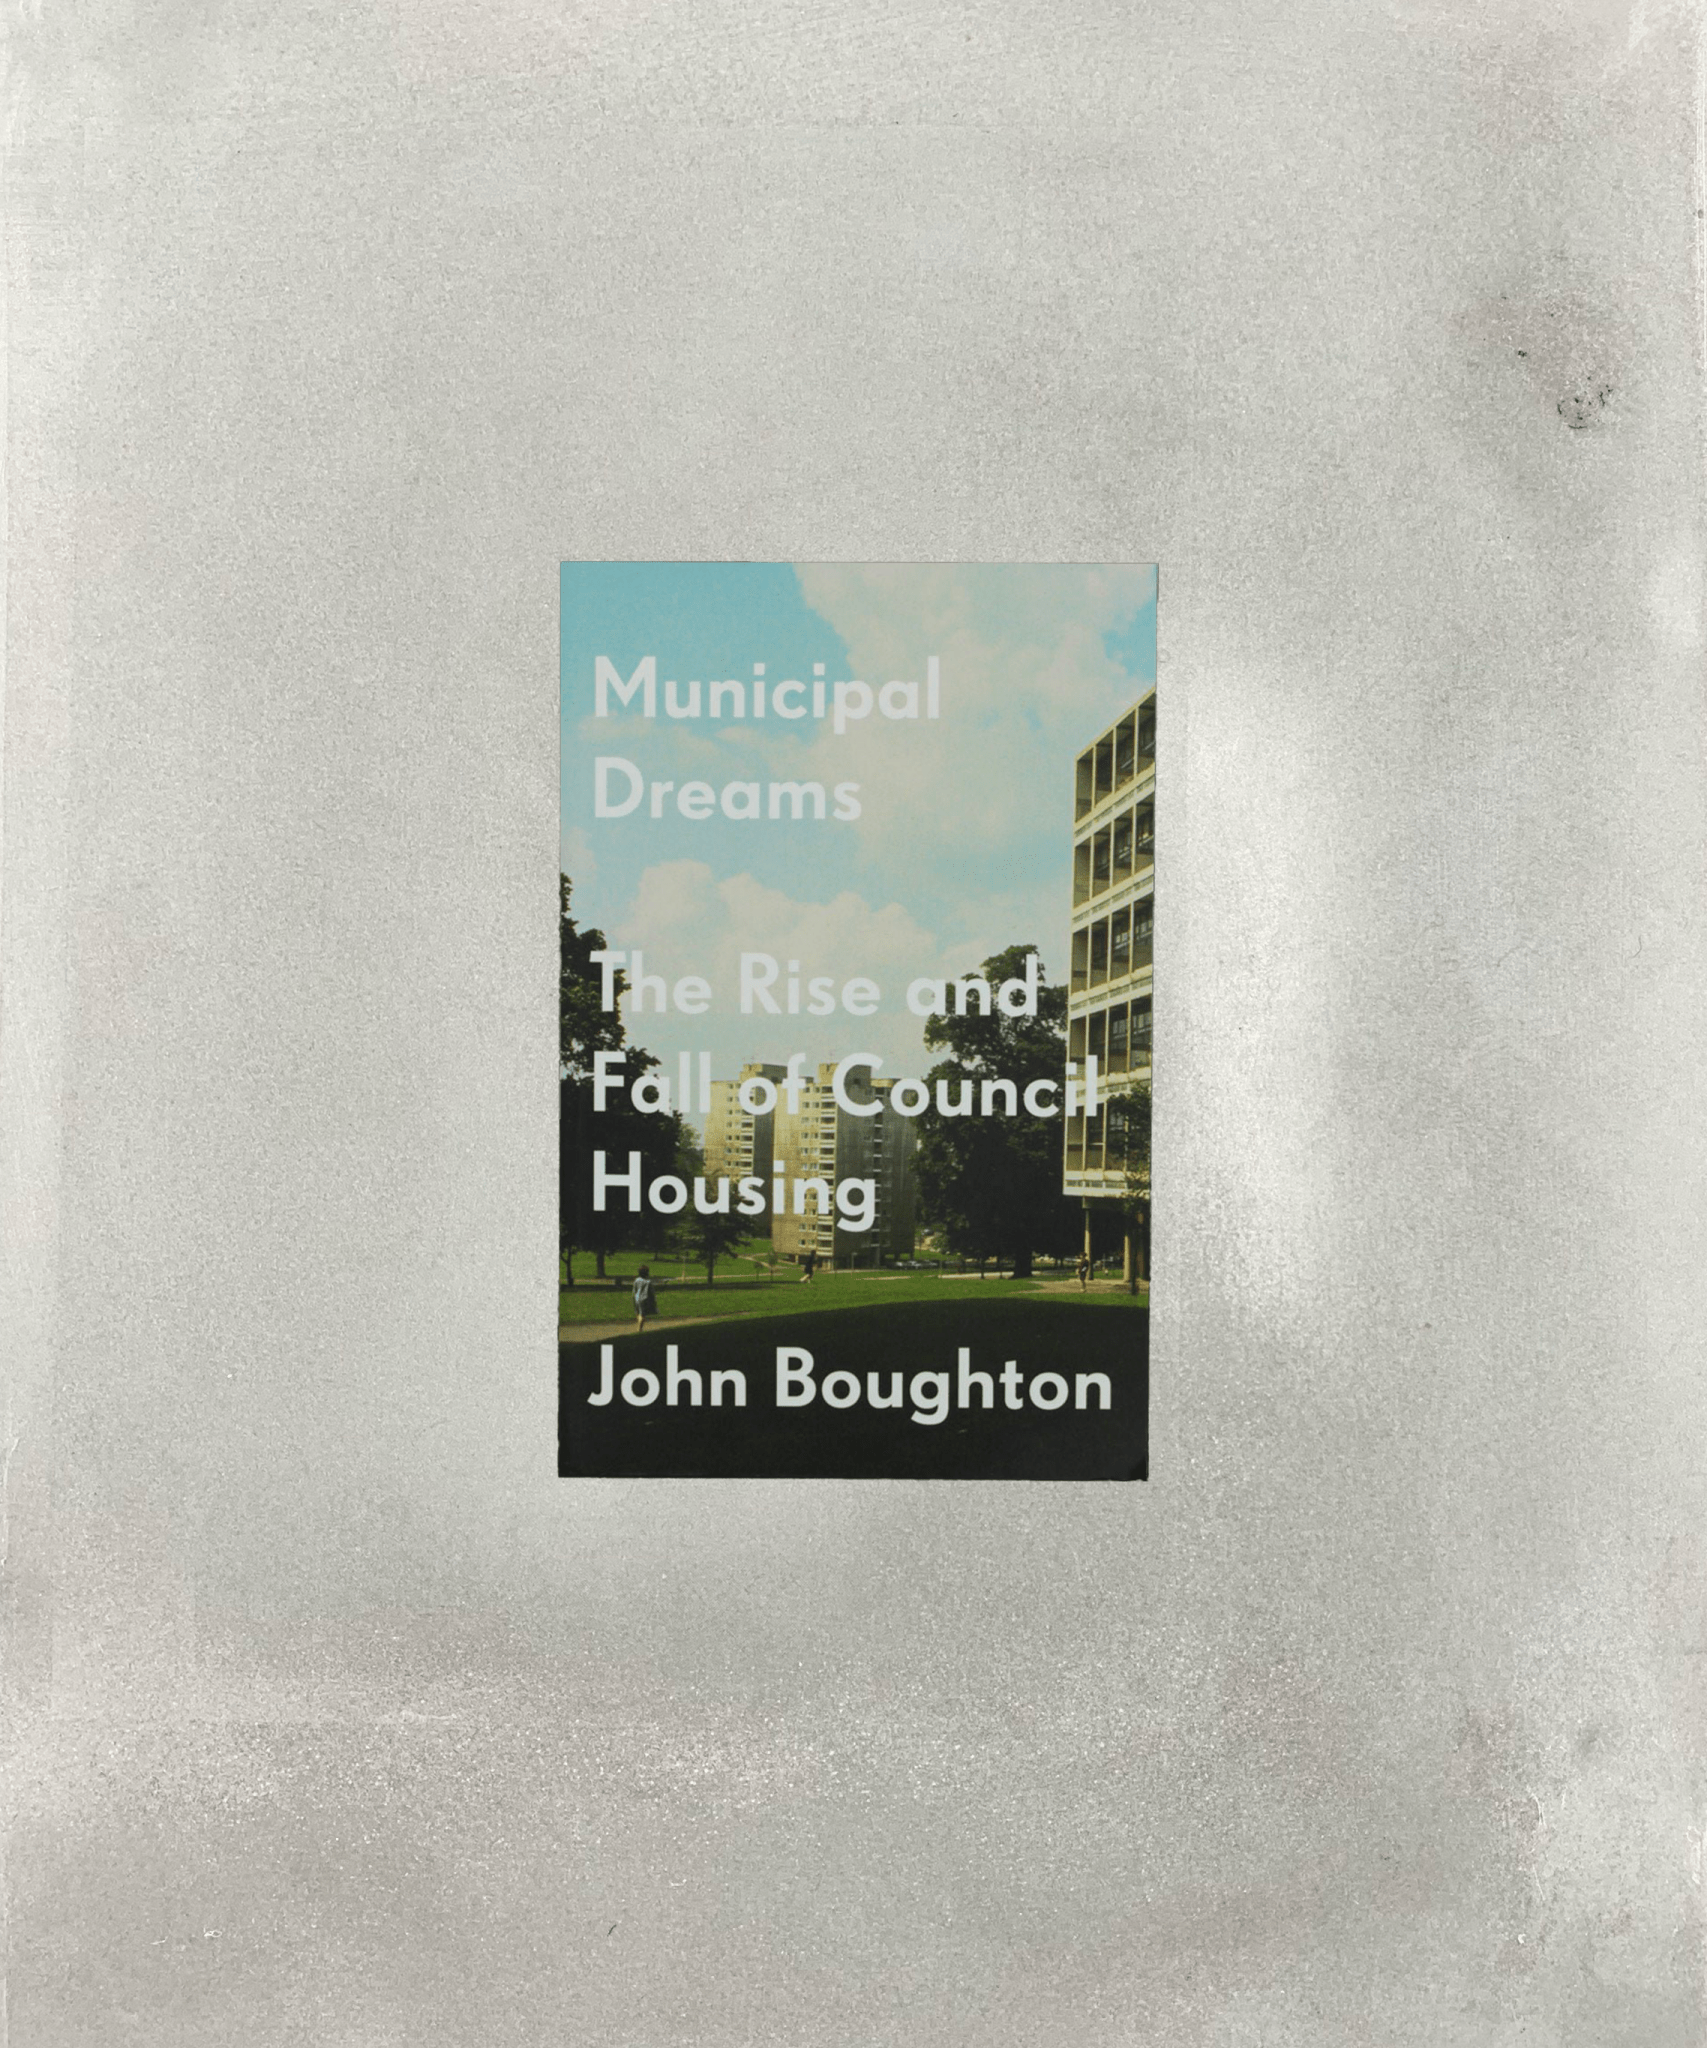 Municipal Dreams: The Rise and Fall of Council Housing-housing-urbanism-book-TACO!-verso